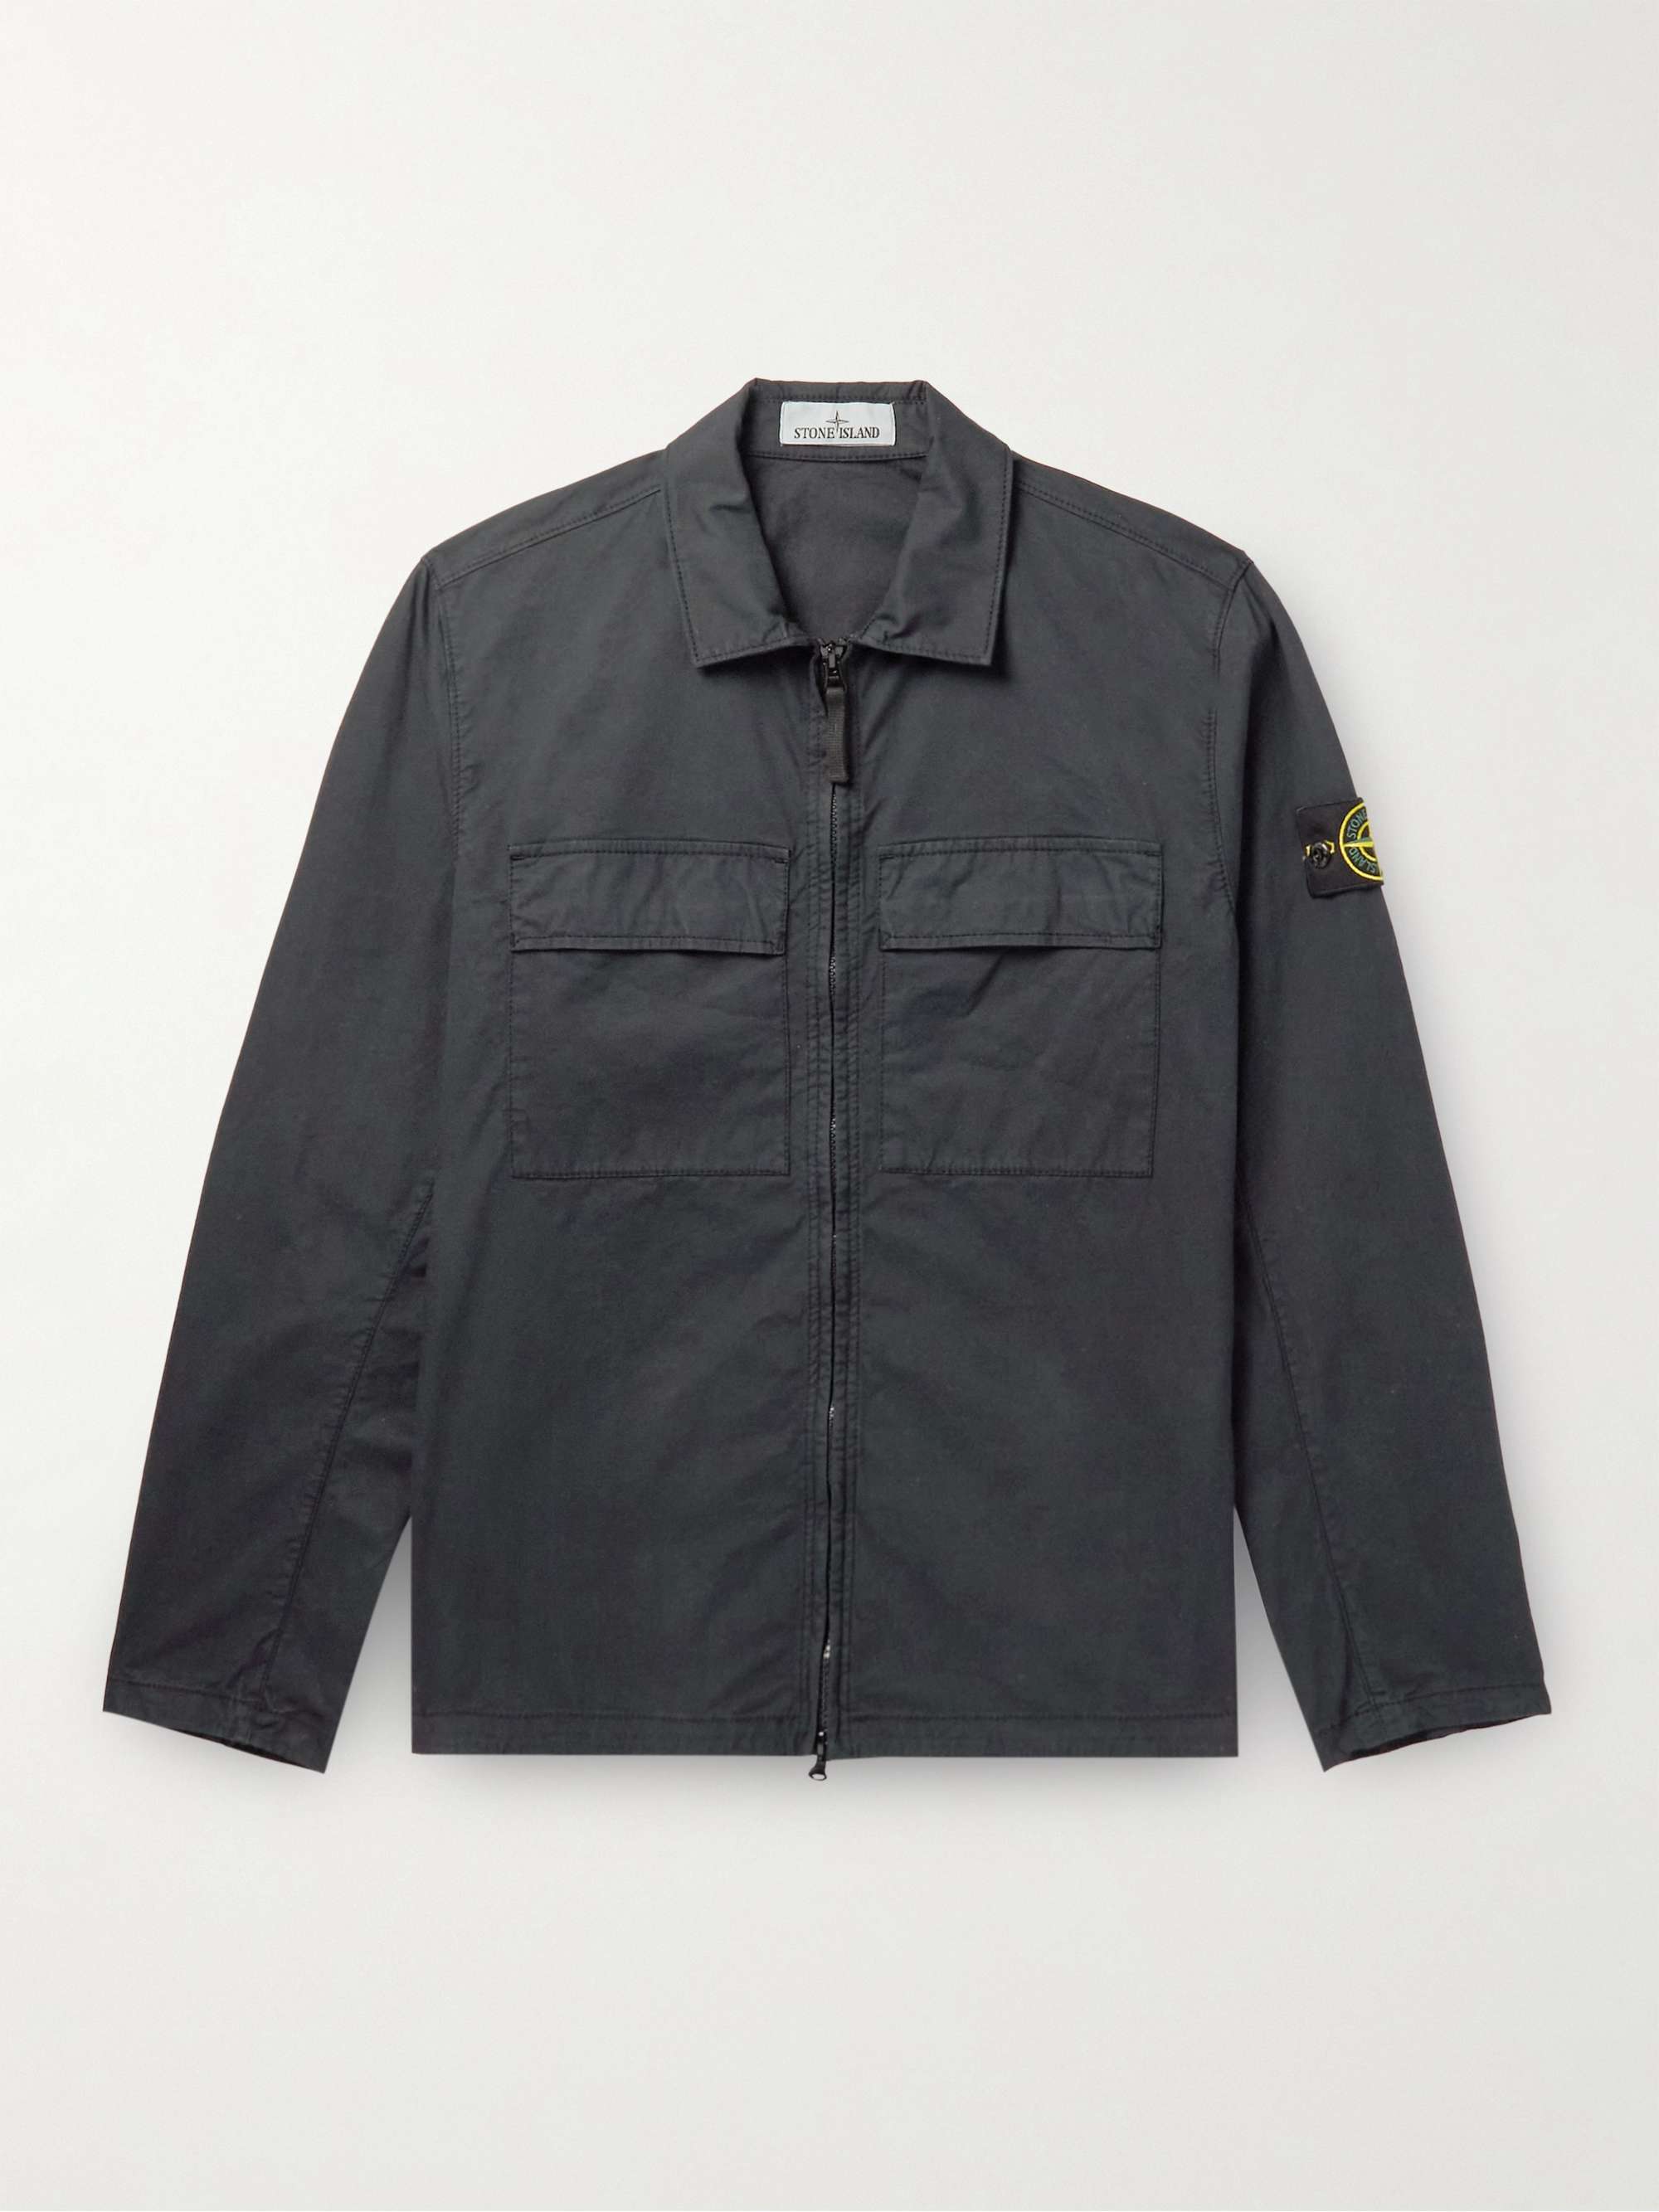 STONE ISLAND Logo-Appliqued Cotton-Blend Twill Overshirt,Charcoal